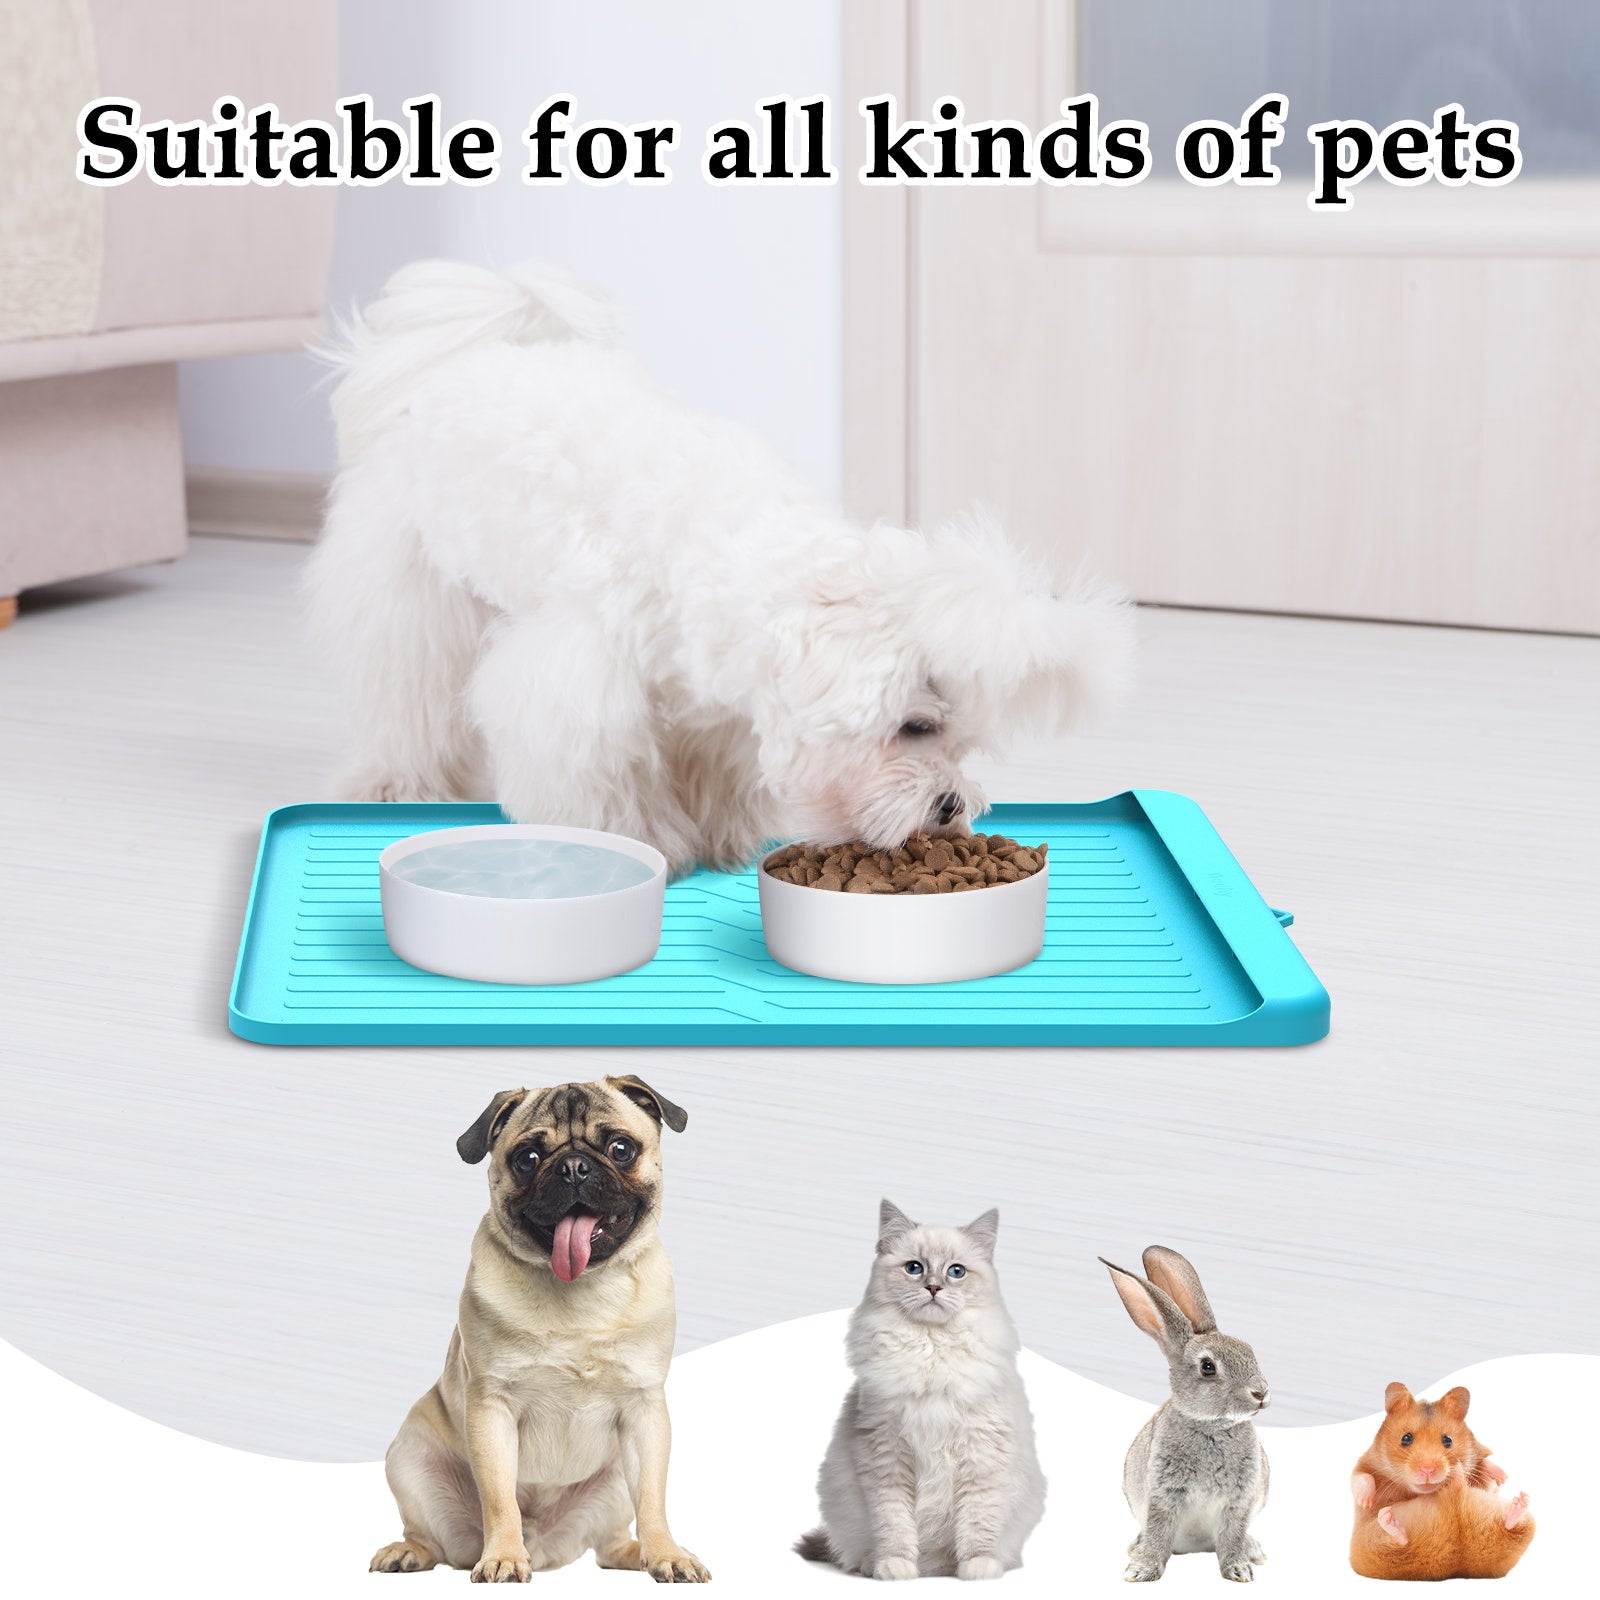  Dog Food Mat - Silicone Dog Mat for Food and Water - 36 x 24  Large Pet Feeding Mats with Residue Collection Pocket - Waterproof Dog Cat  Bowl Mat with High